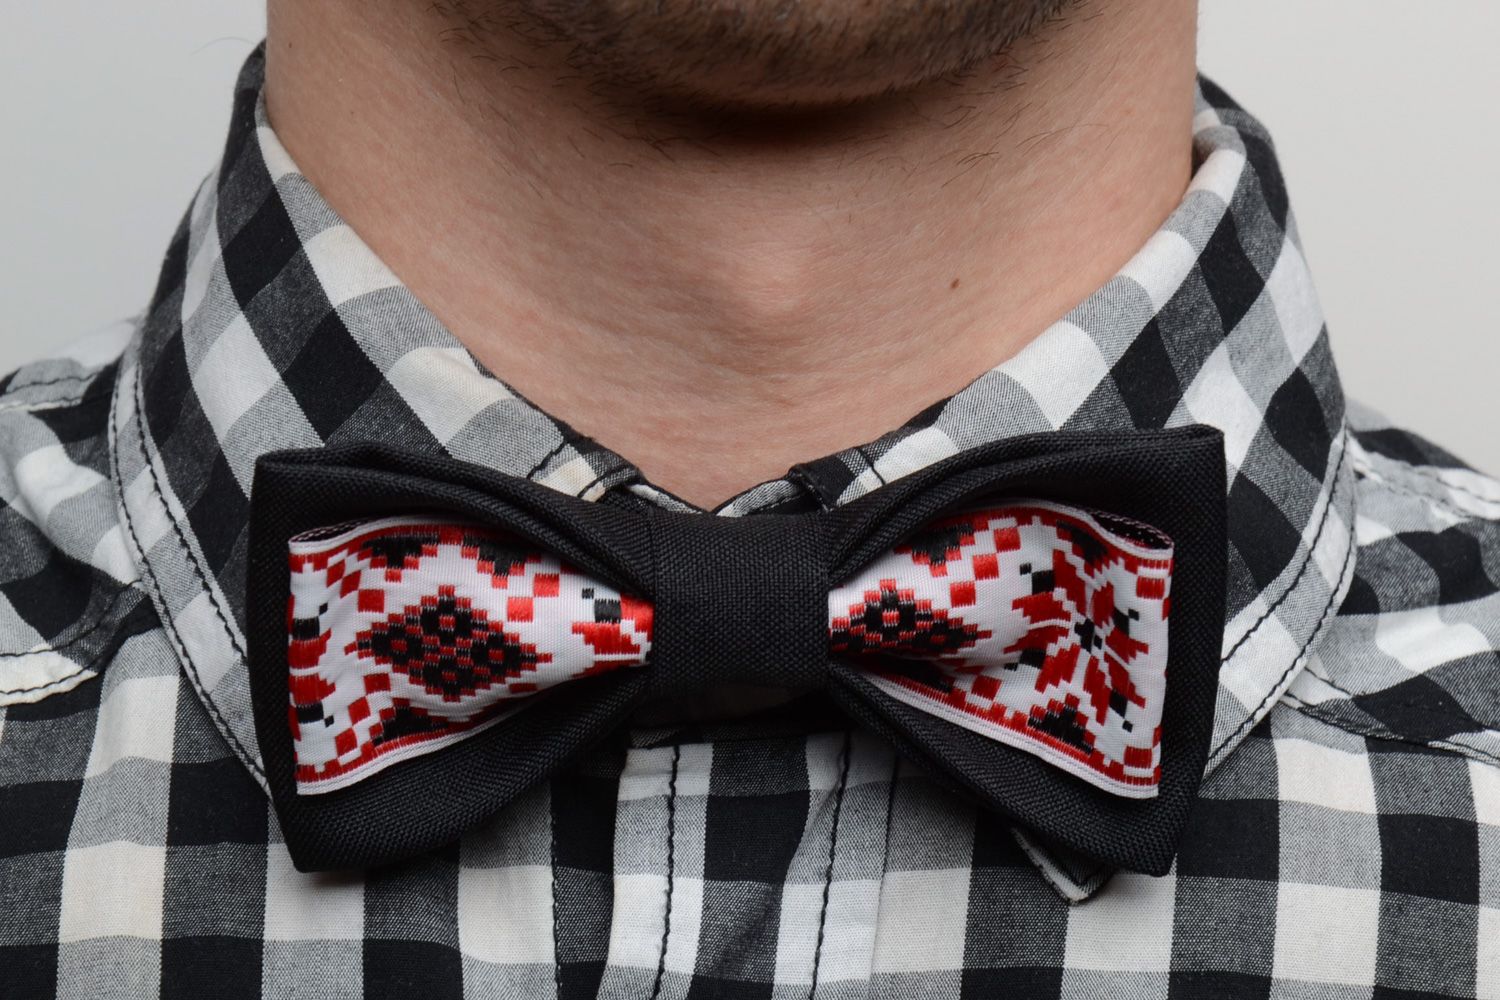 Handmade bow tie sewn of black and ornamented costume fabric in ethnic style photo 1